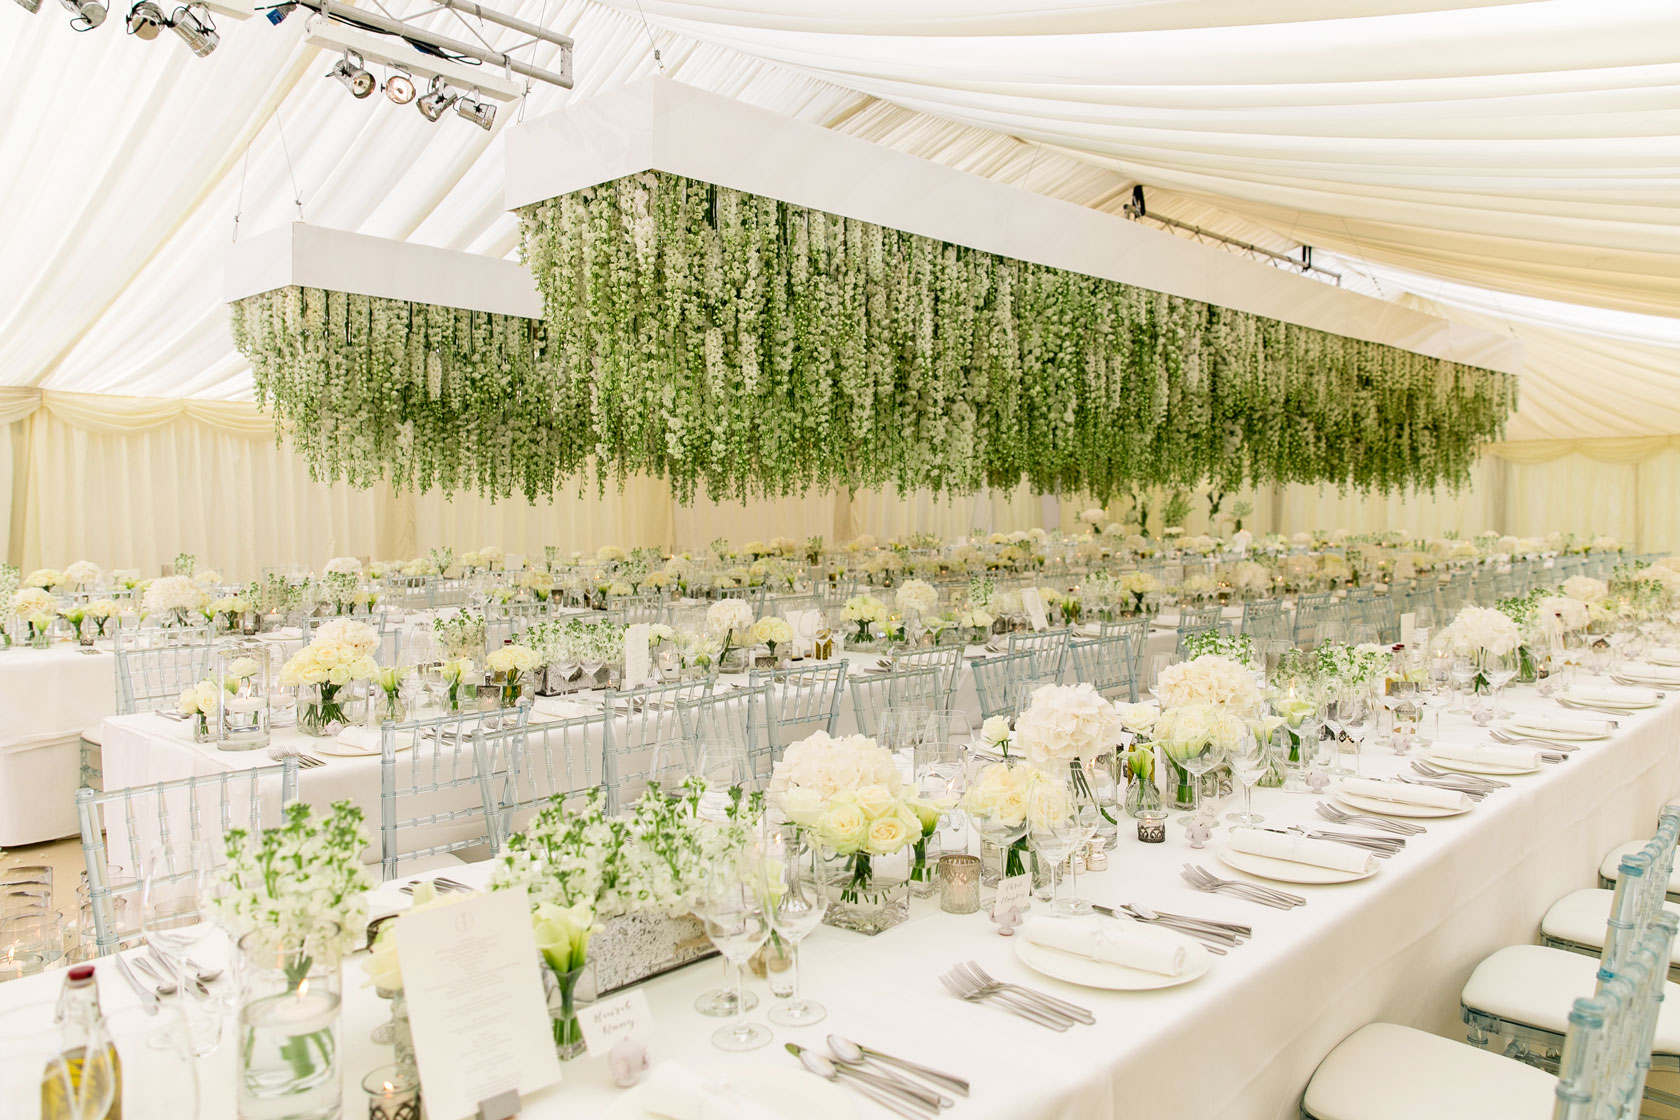 A marquee wedding with thousands of delphiniums hanging above the tables